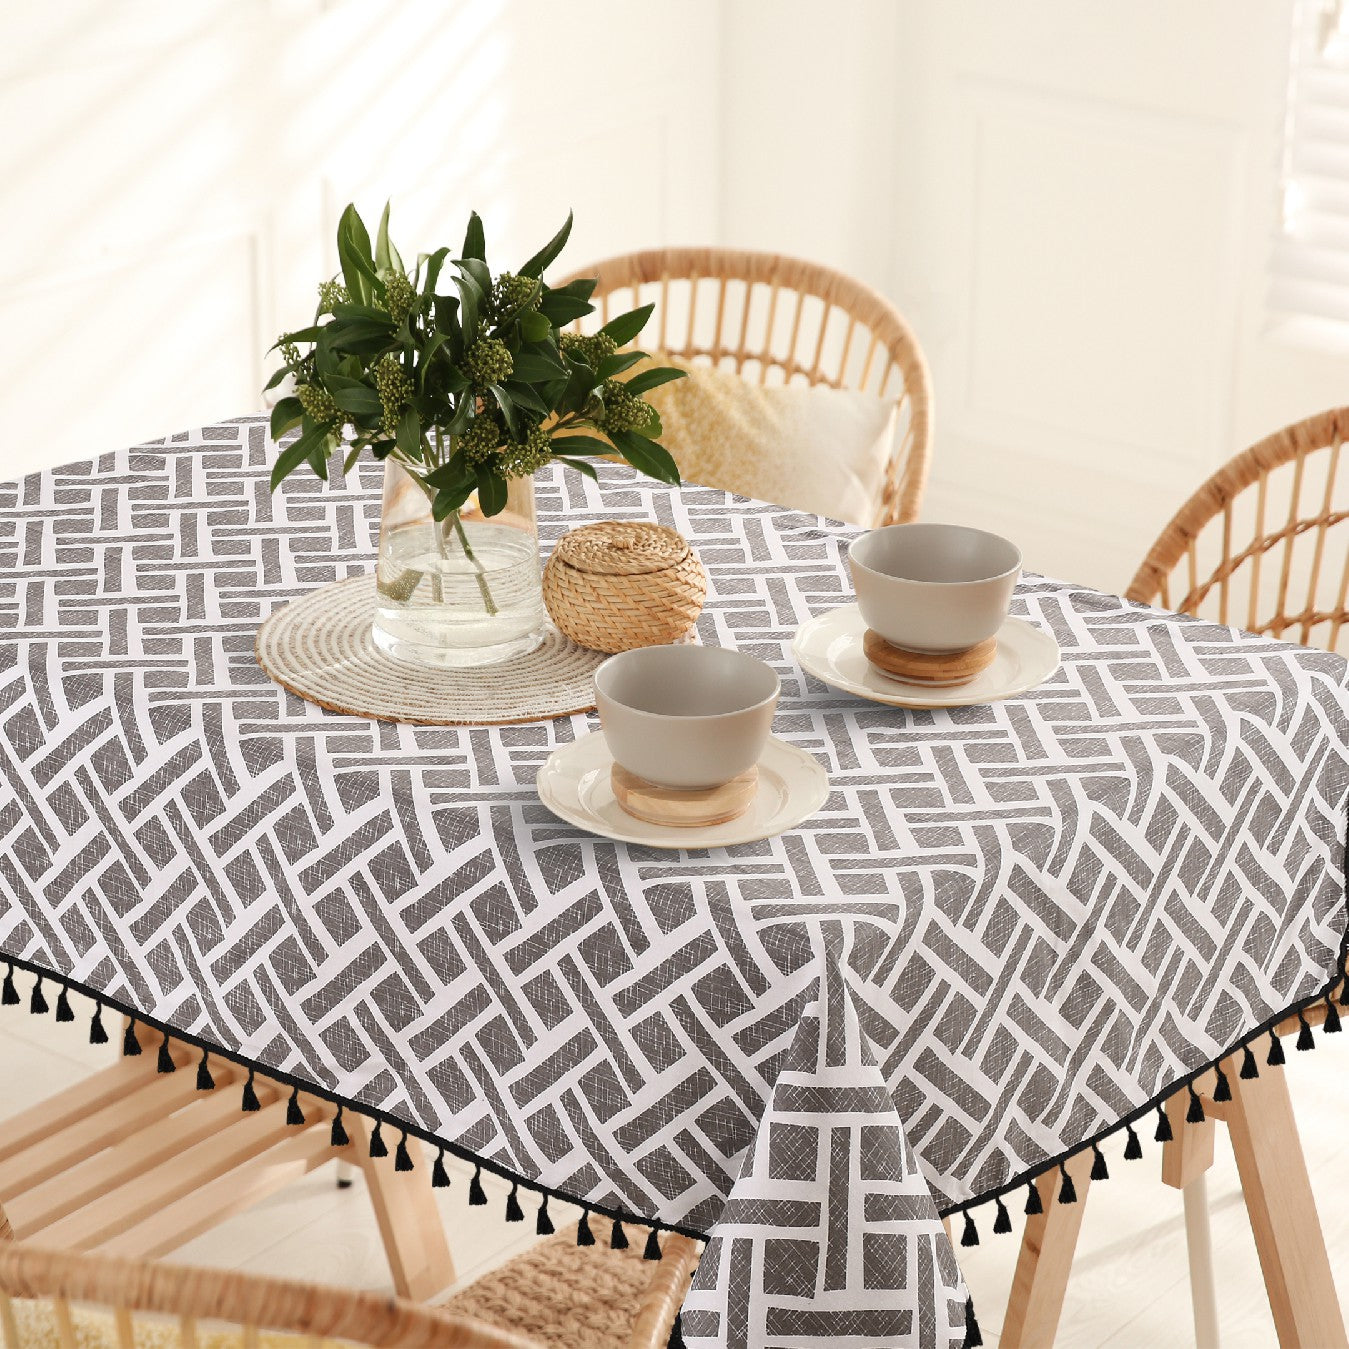 The Art of Table Covers: From Functionality to Aesthetic Appeal